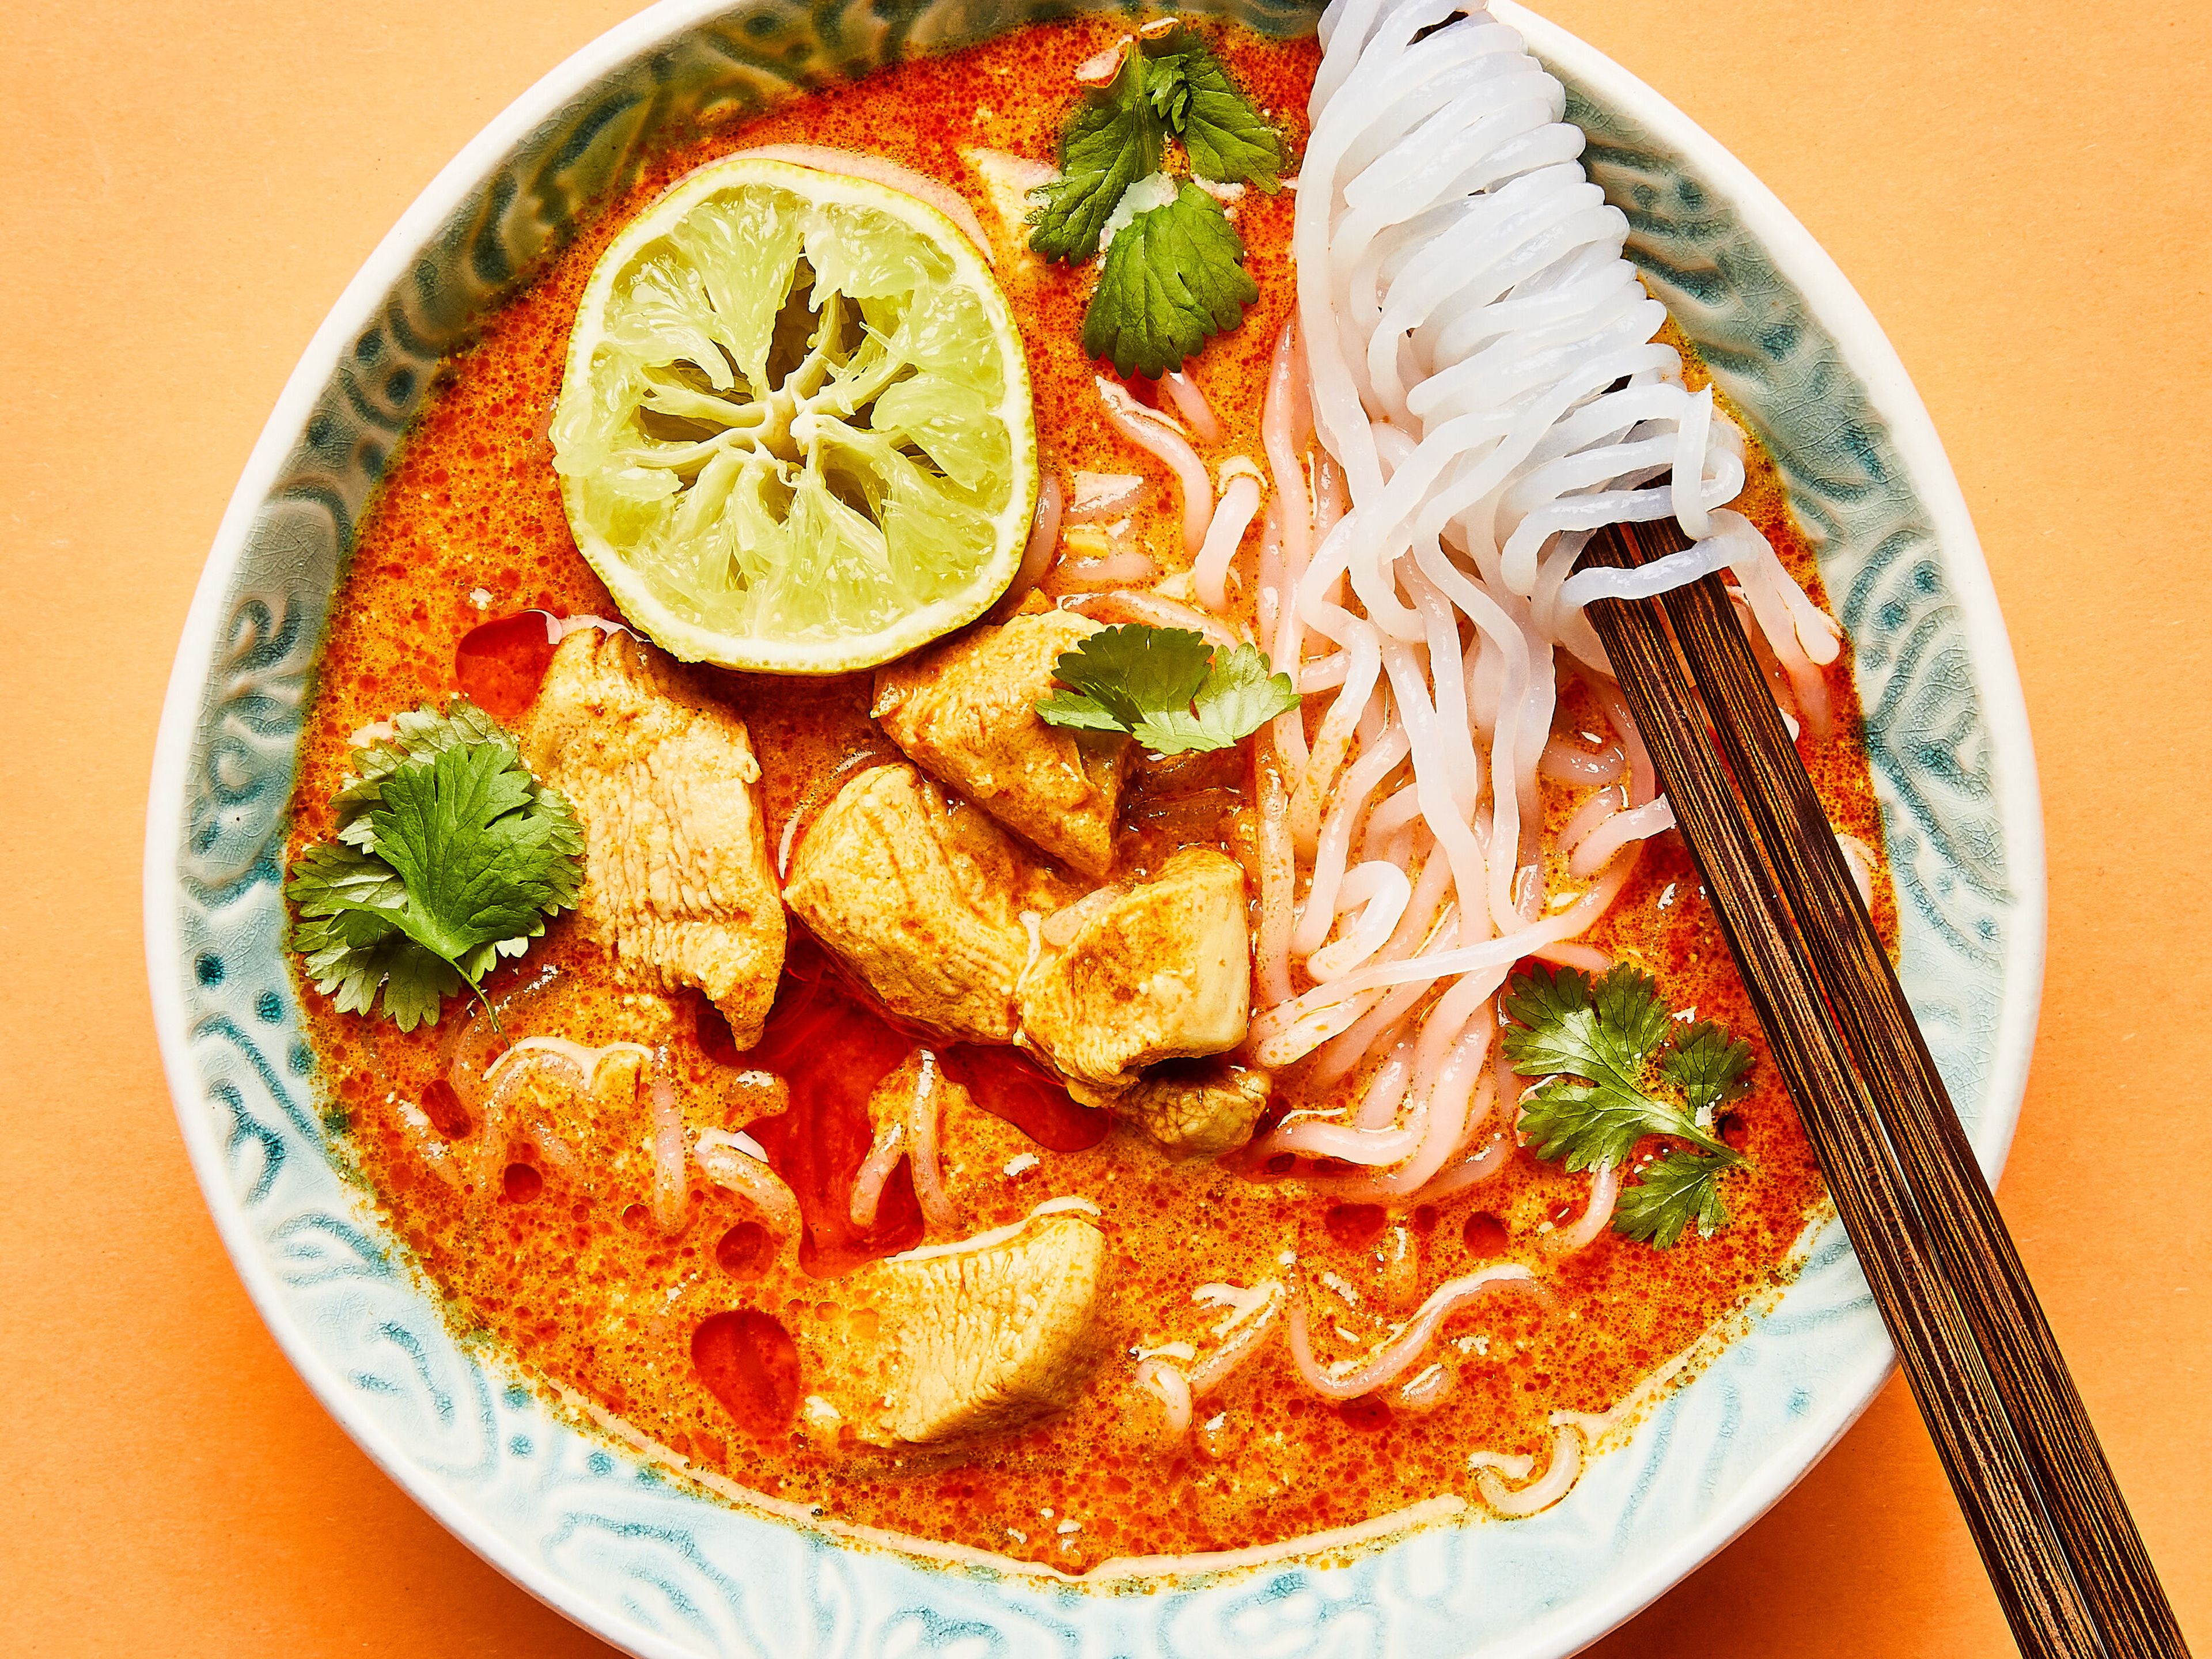 Red curry chicken soup with shirataki noodles